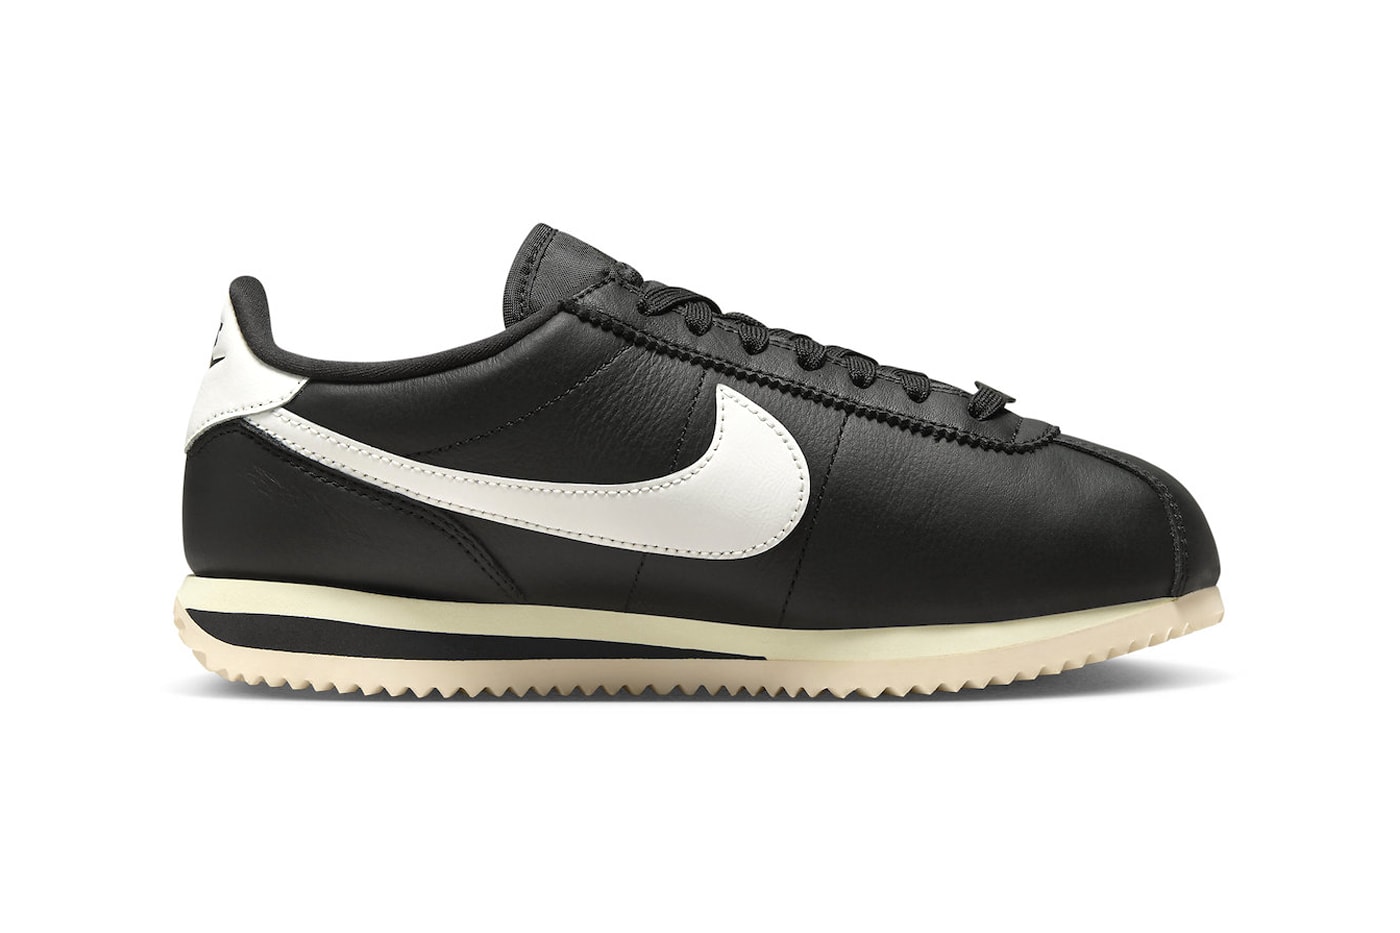 The Nike Cortez Gets the Aged Treatment in "Black/Sail" FB6877-001 Black/Sail-Alabaster retro swoosh sneakers